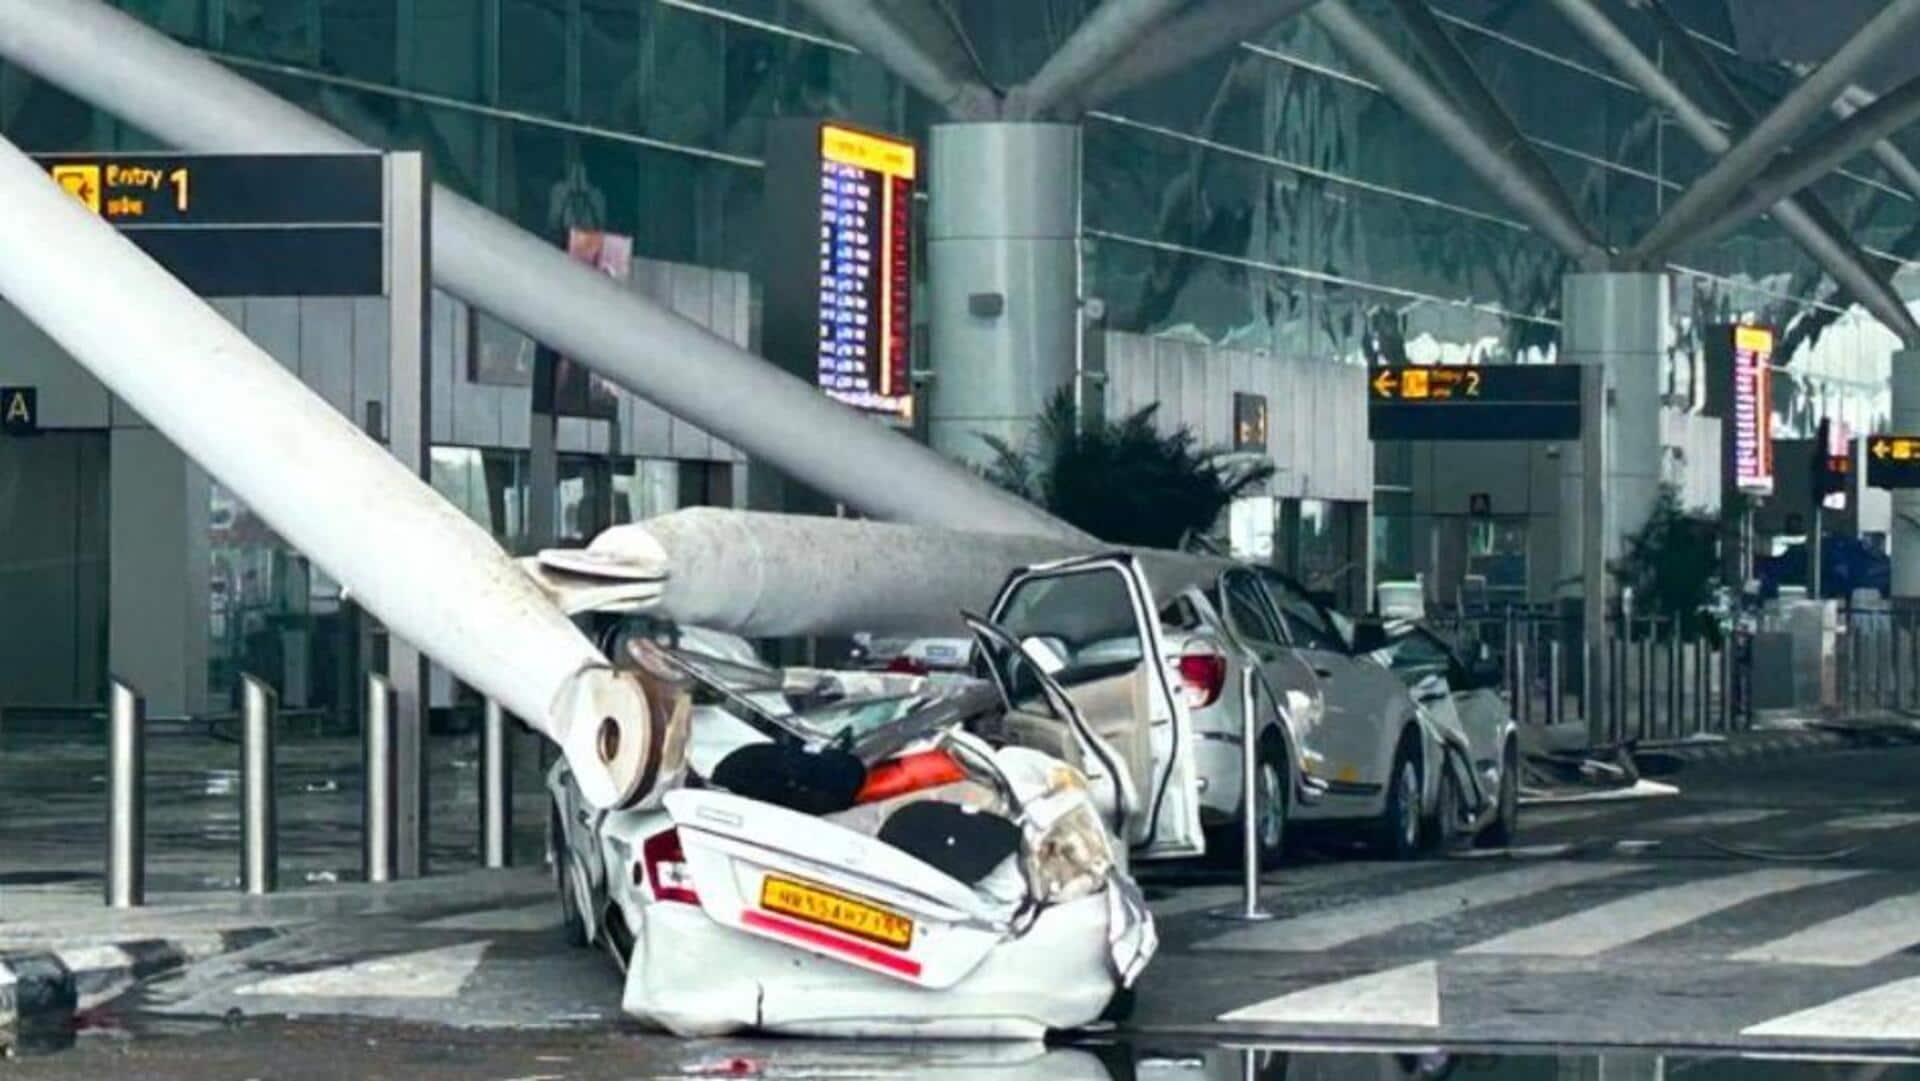 'Built in 2009...': Centre's reply to opposition after airport accident 